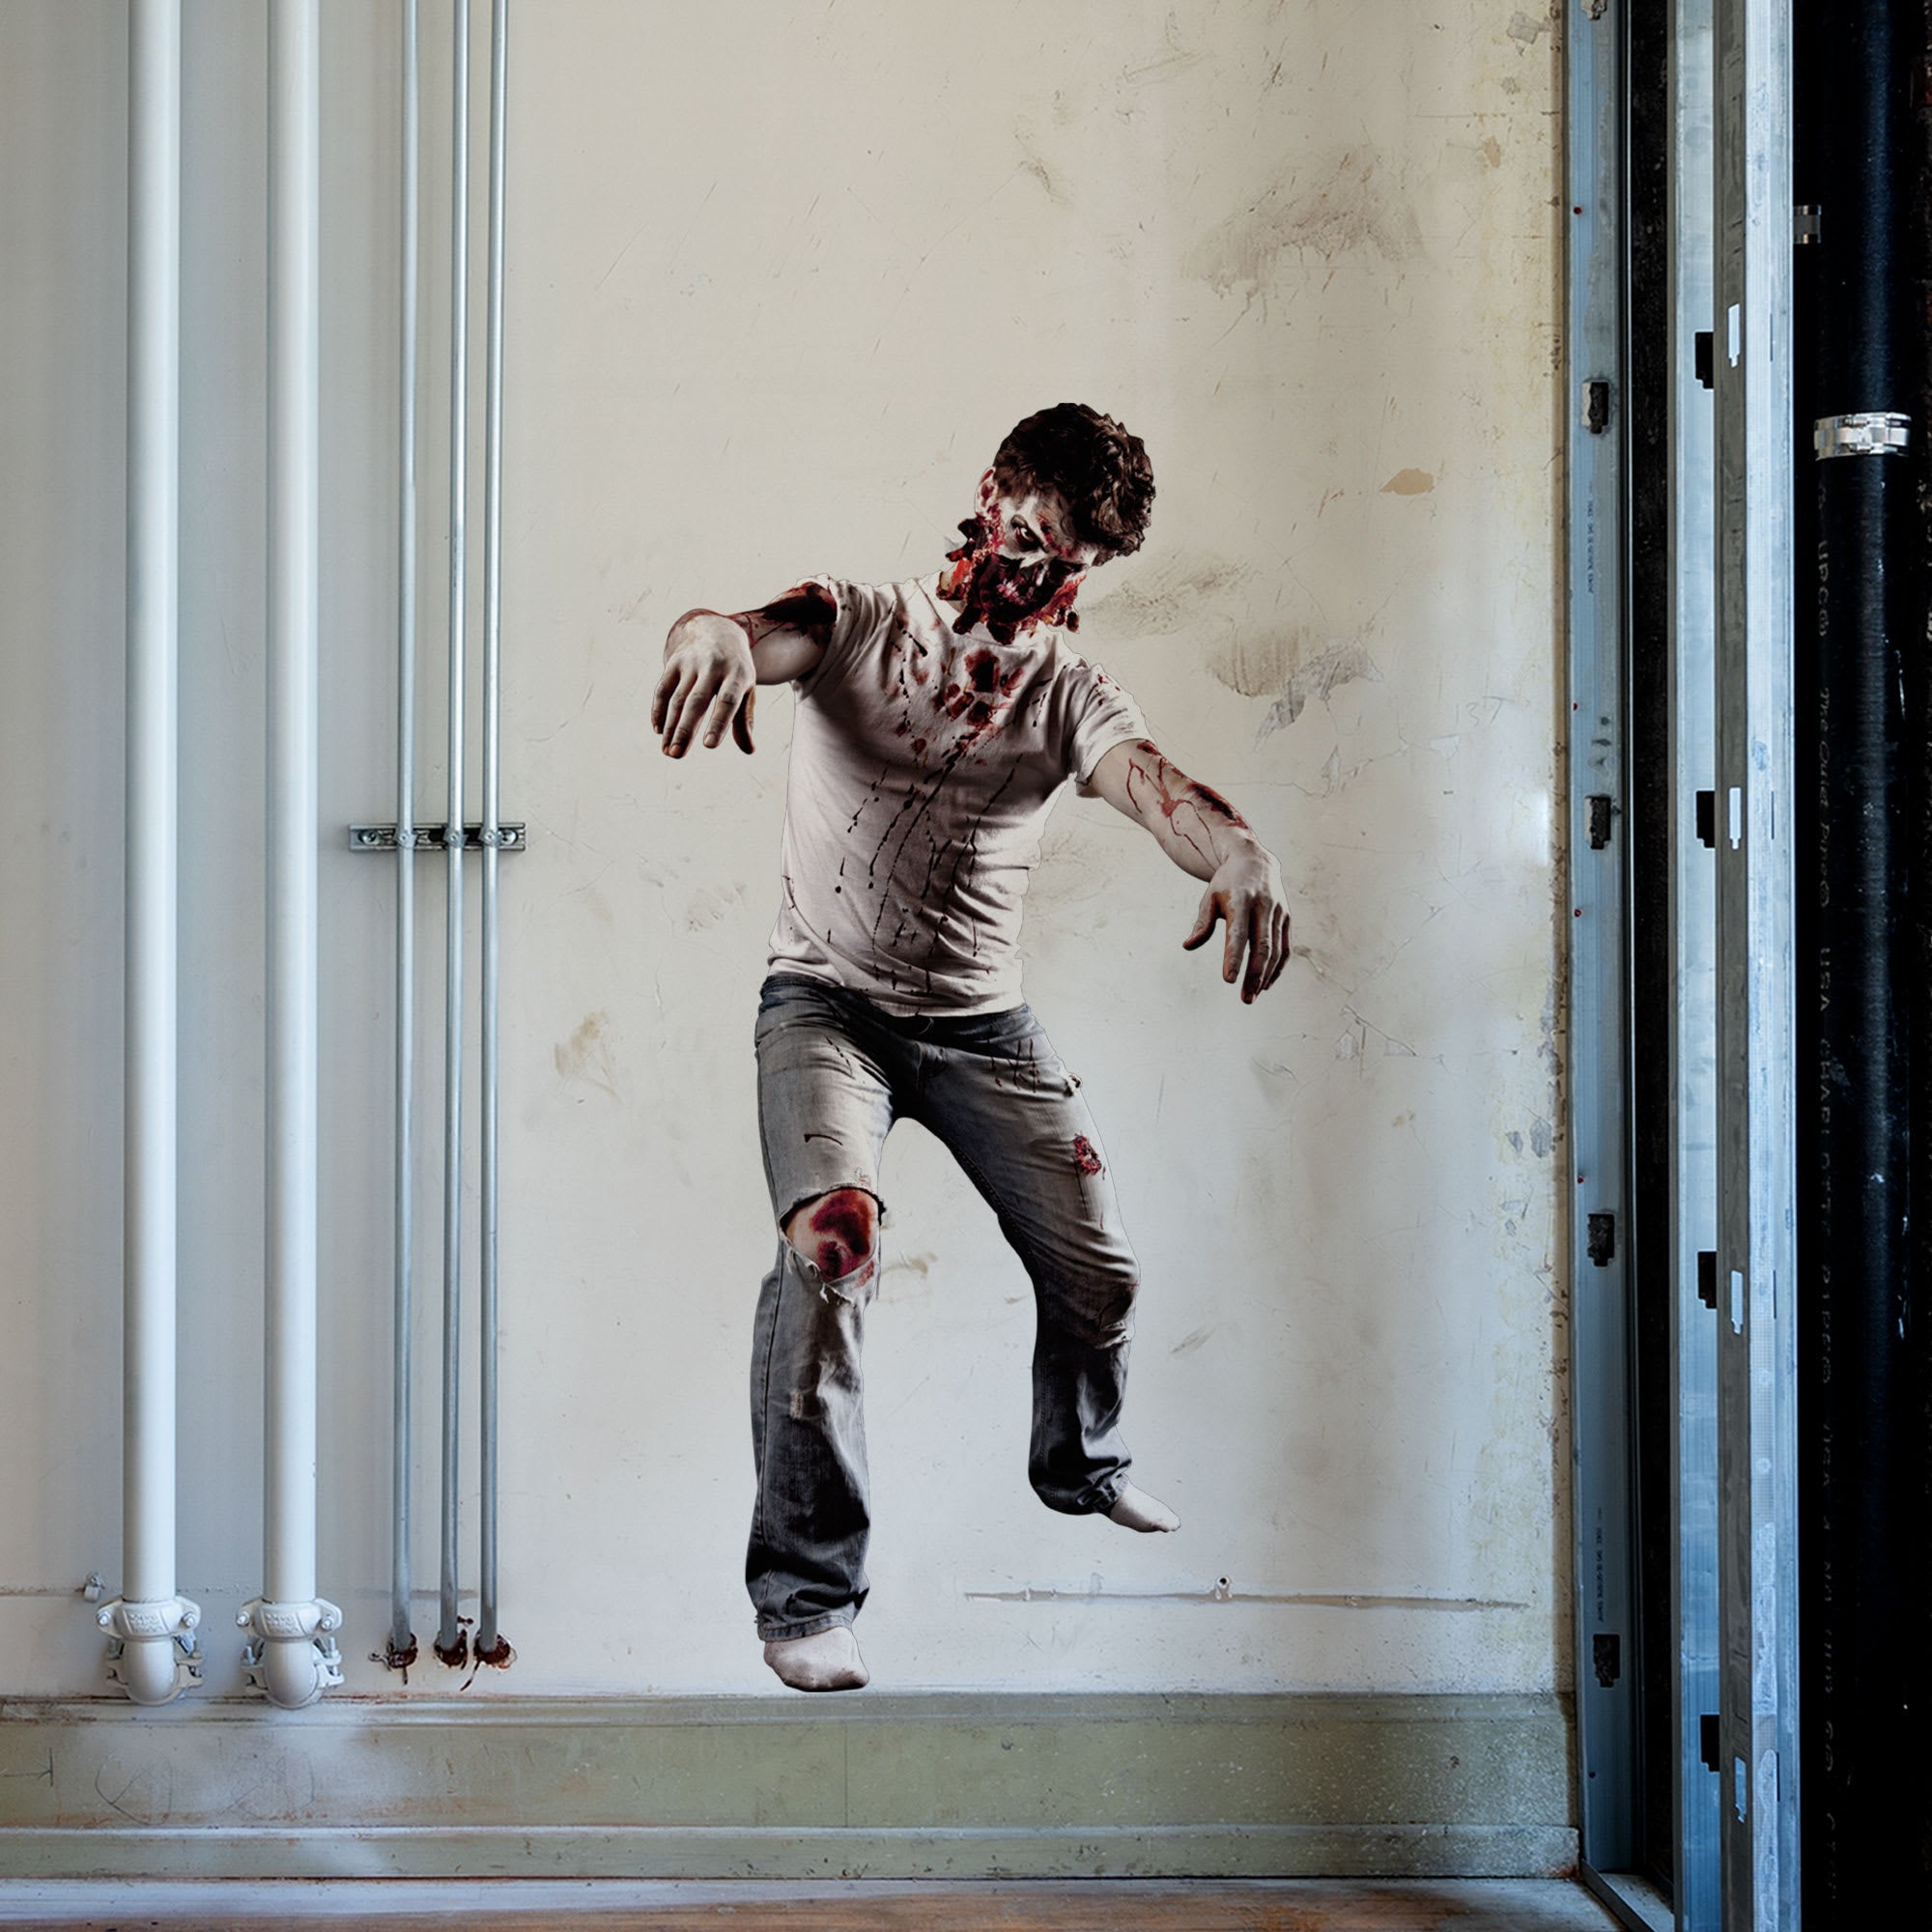 Zombie - Halloween Removable Wall Decal 36.0"W x 72.0"H by Fathead | Vinyl